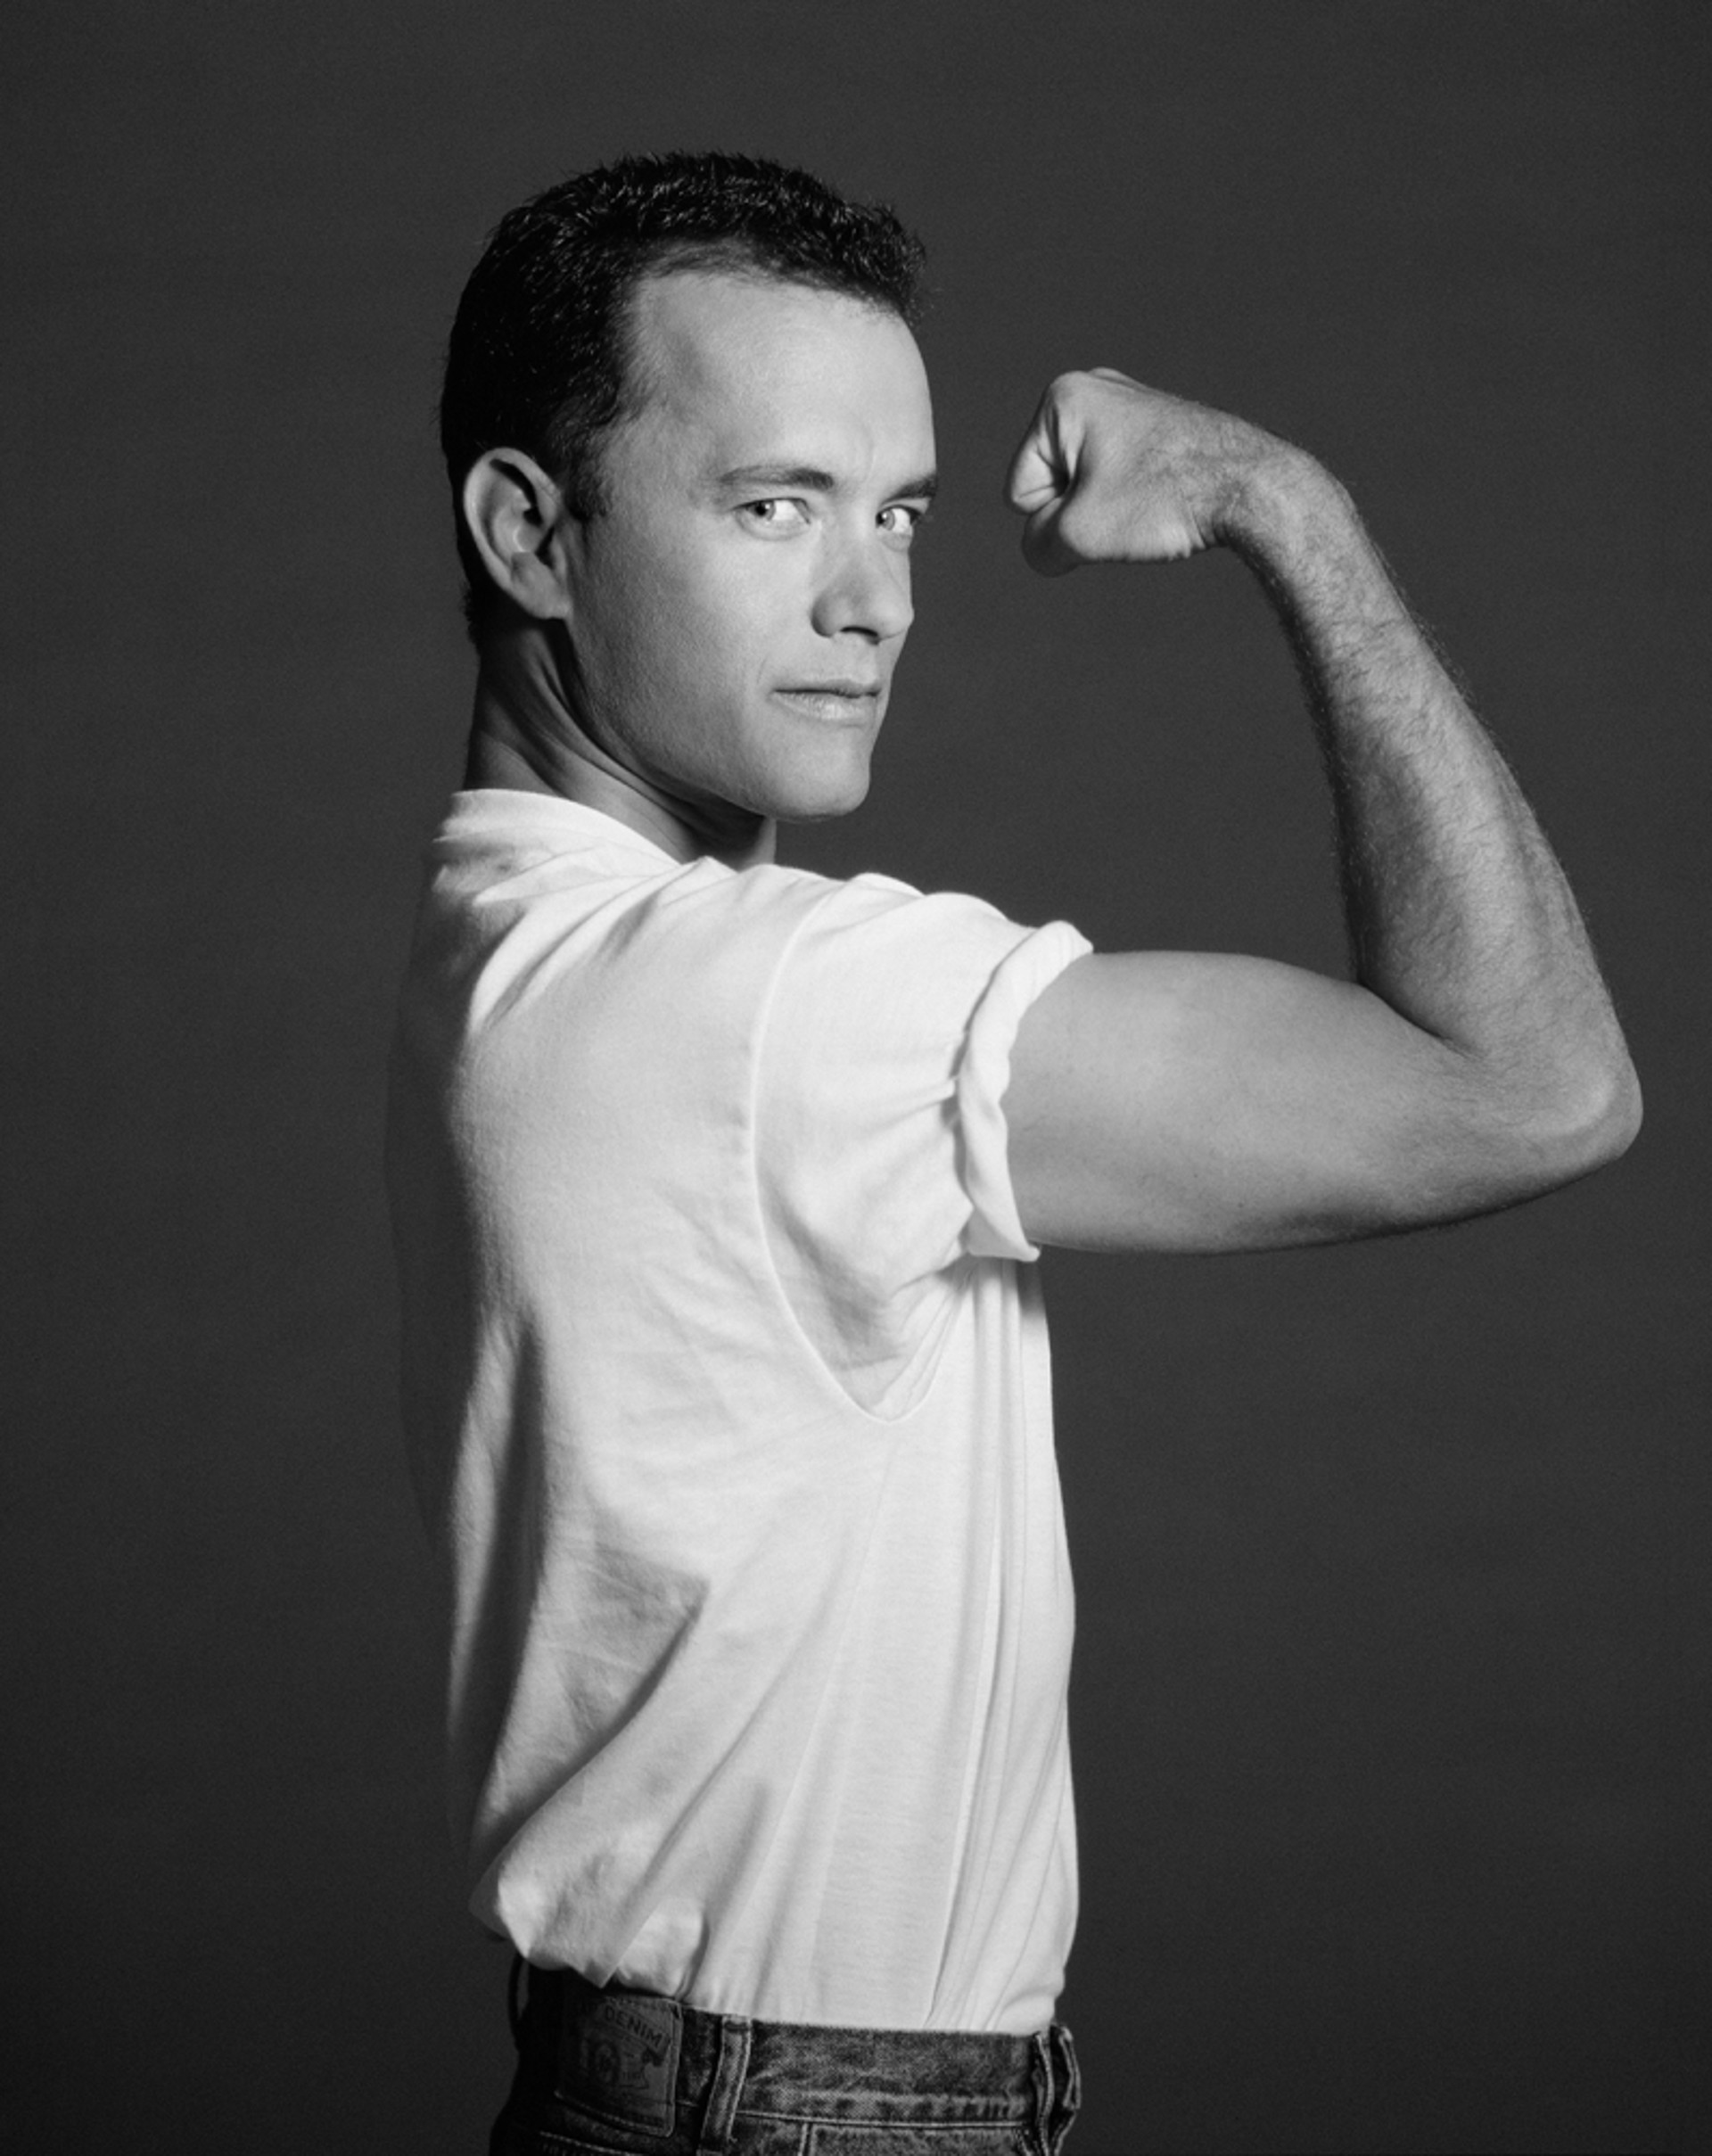 93065 Tom Hanks Strong F11 BW by Timothy White